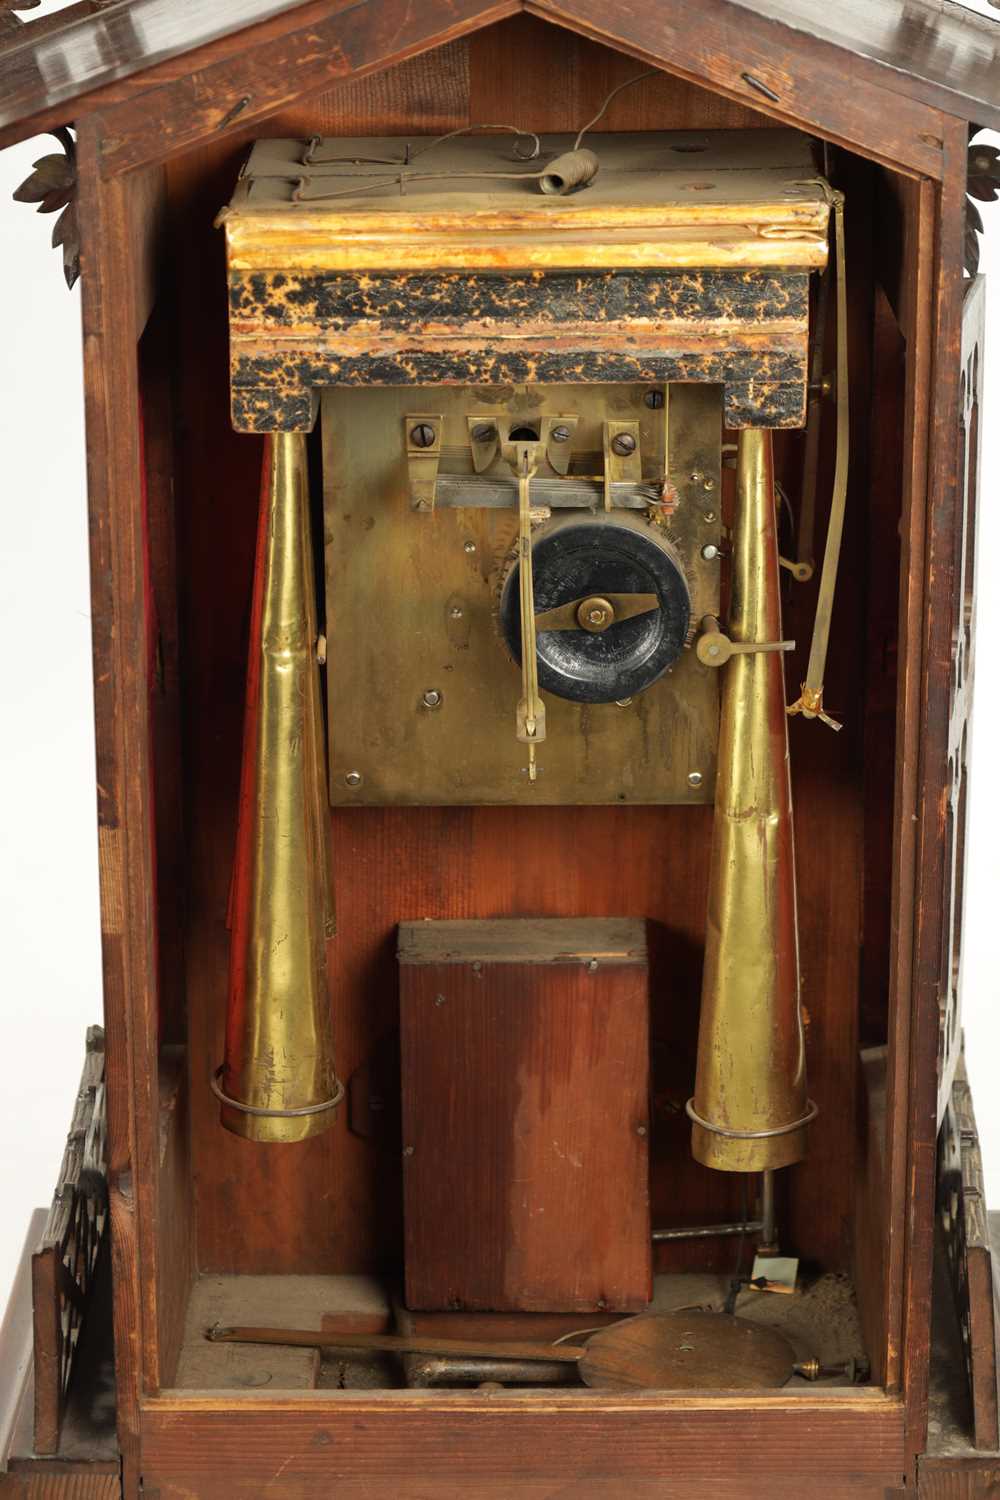 A LARGE LATE 19TH CENTURY BLACK FOREST TRUMPETER CLOCK - Image 7 of 11